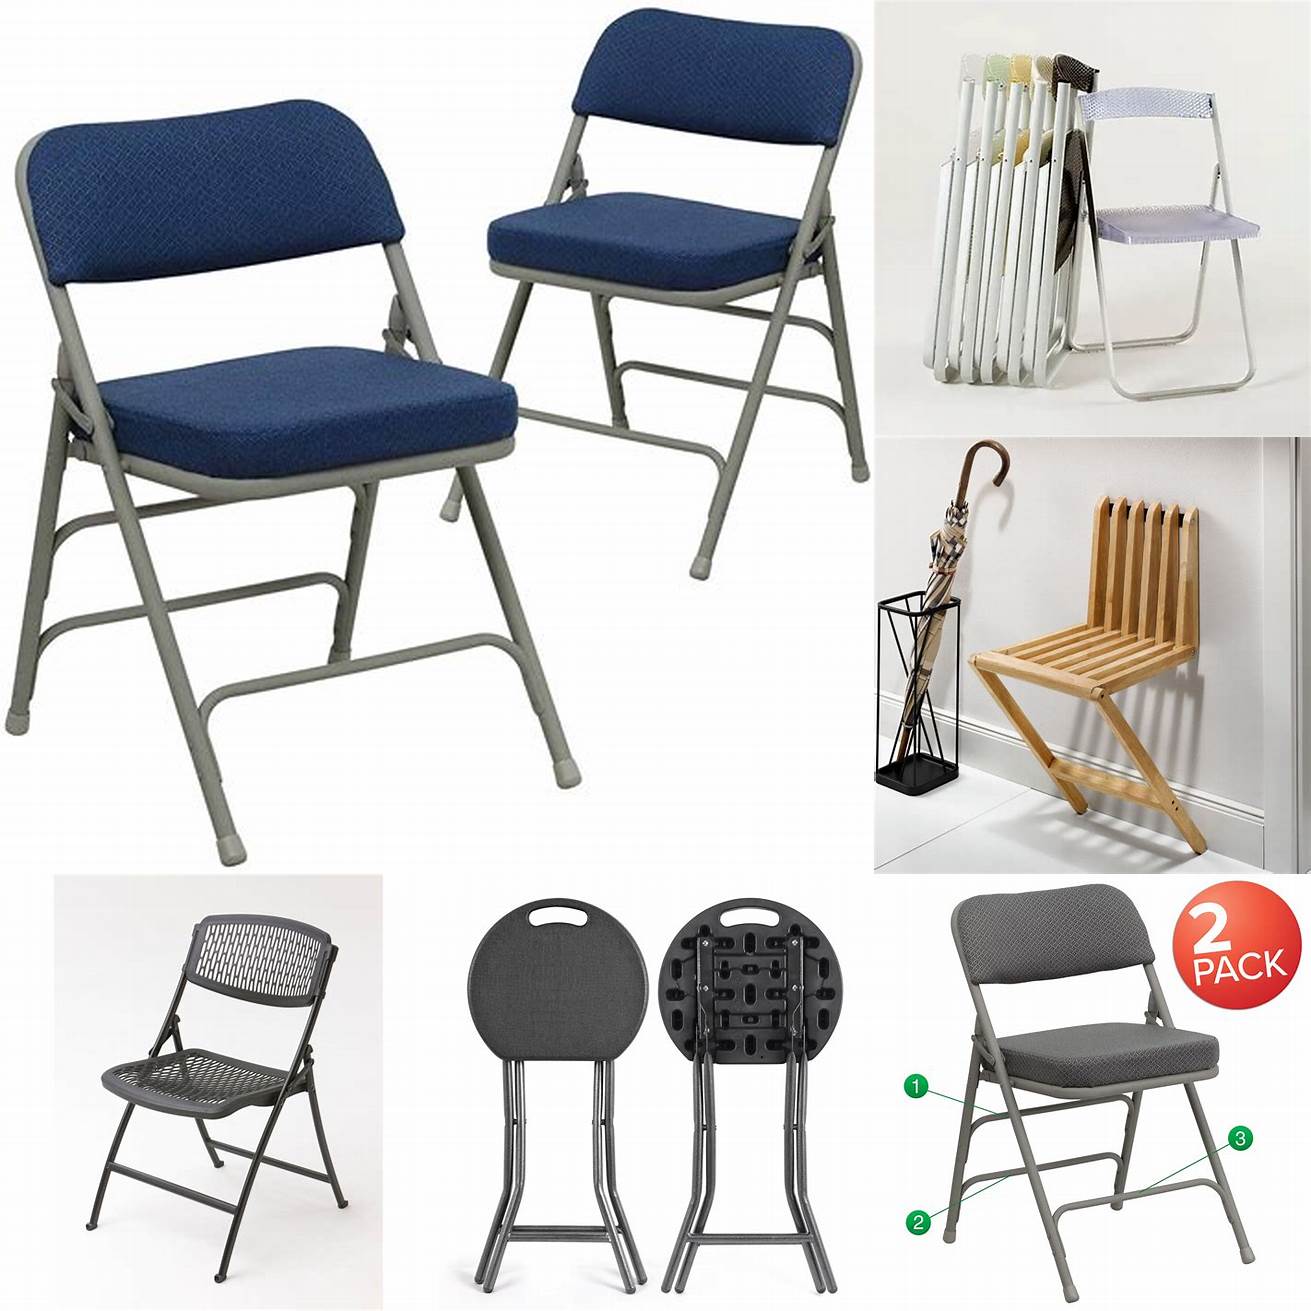 Folding chairs are great for small spaces that need extra seating options They can be easily stored when not in use saving valuable floor space